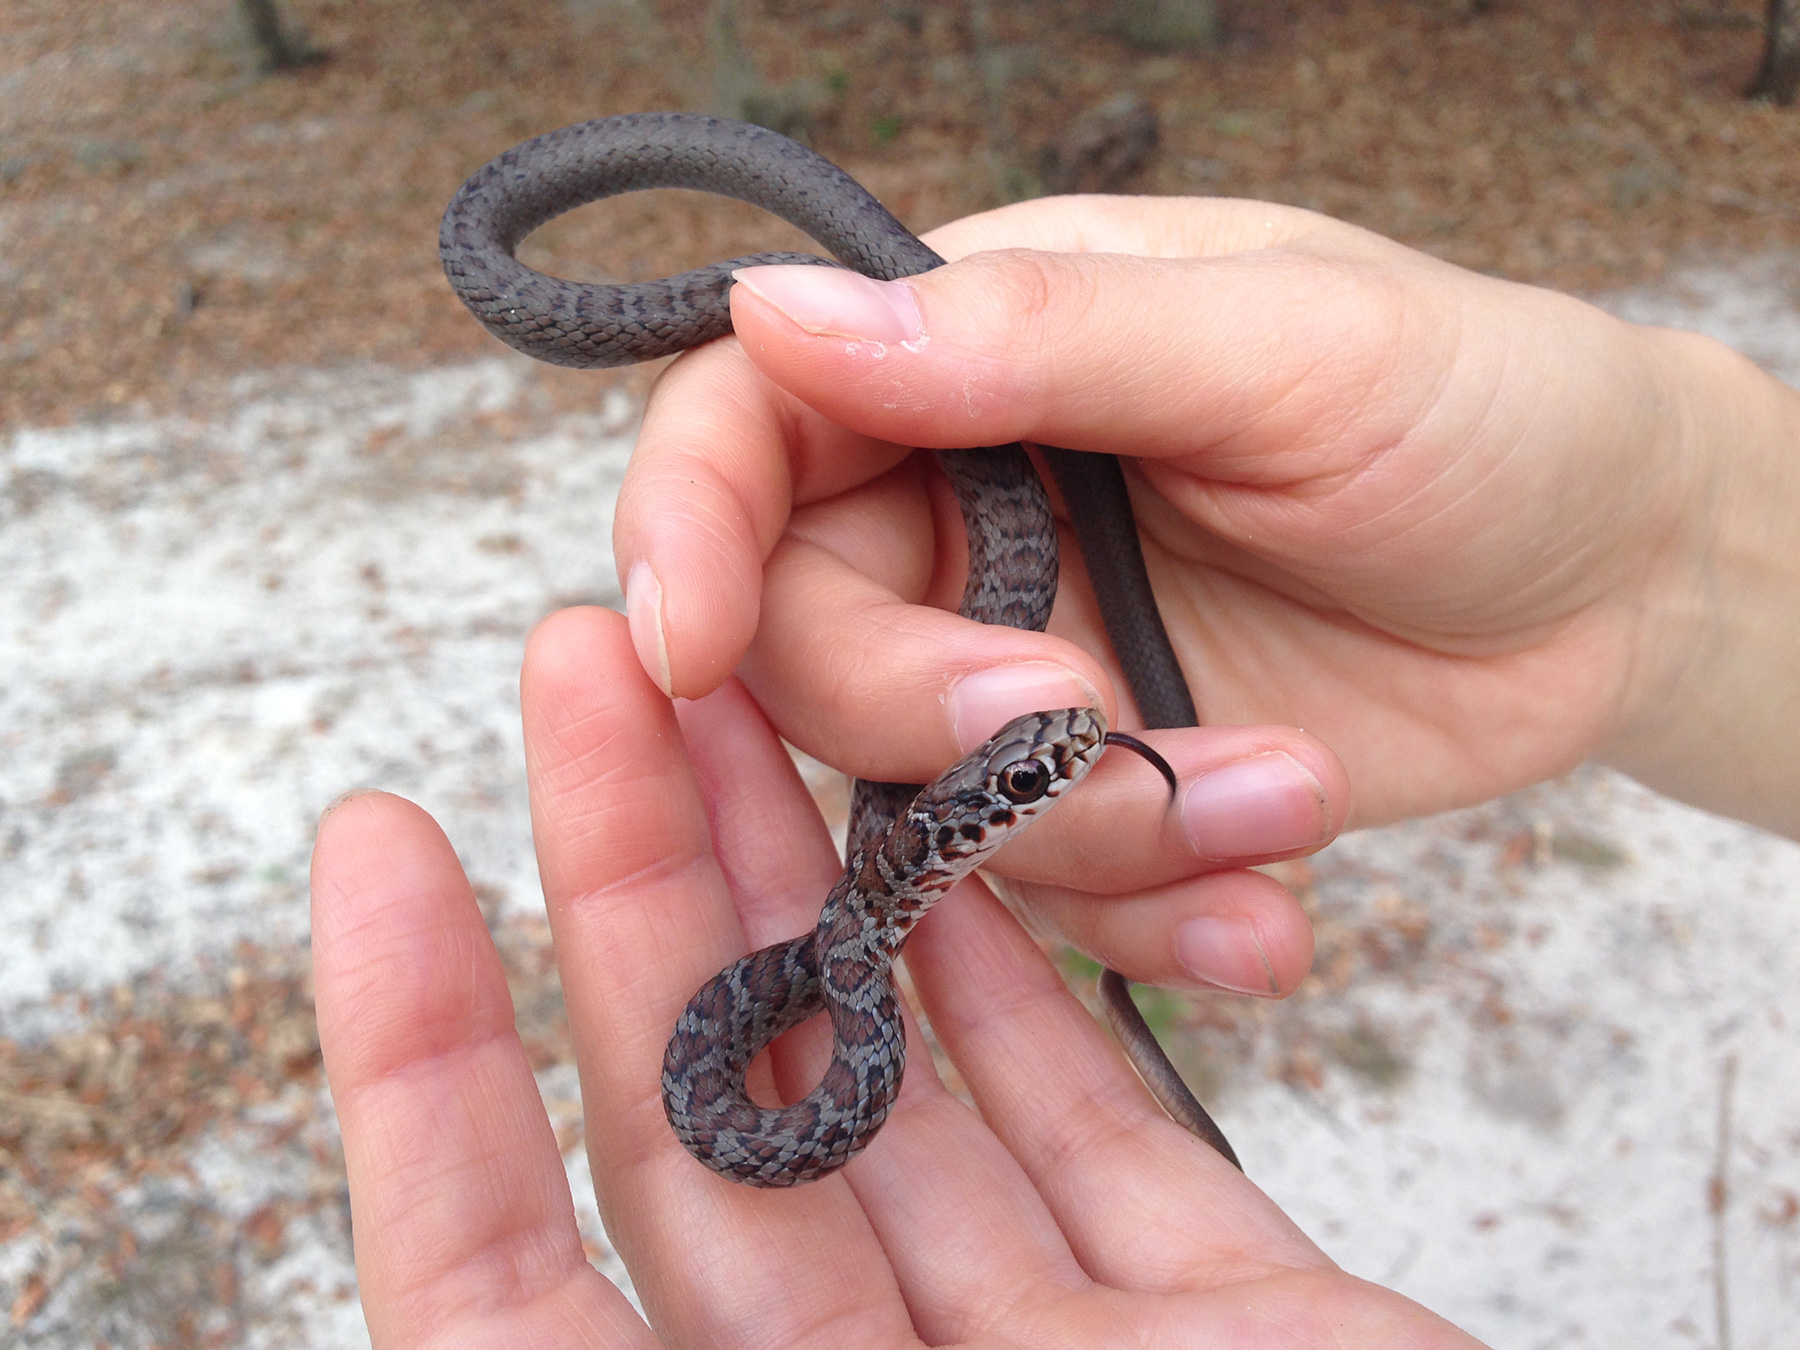 North American Racer – Florida Snake ID Guide